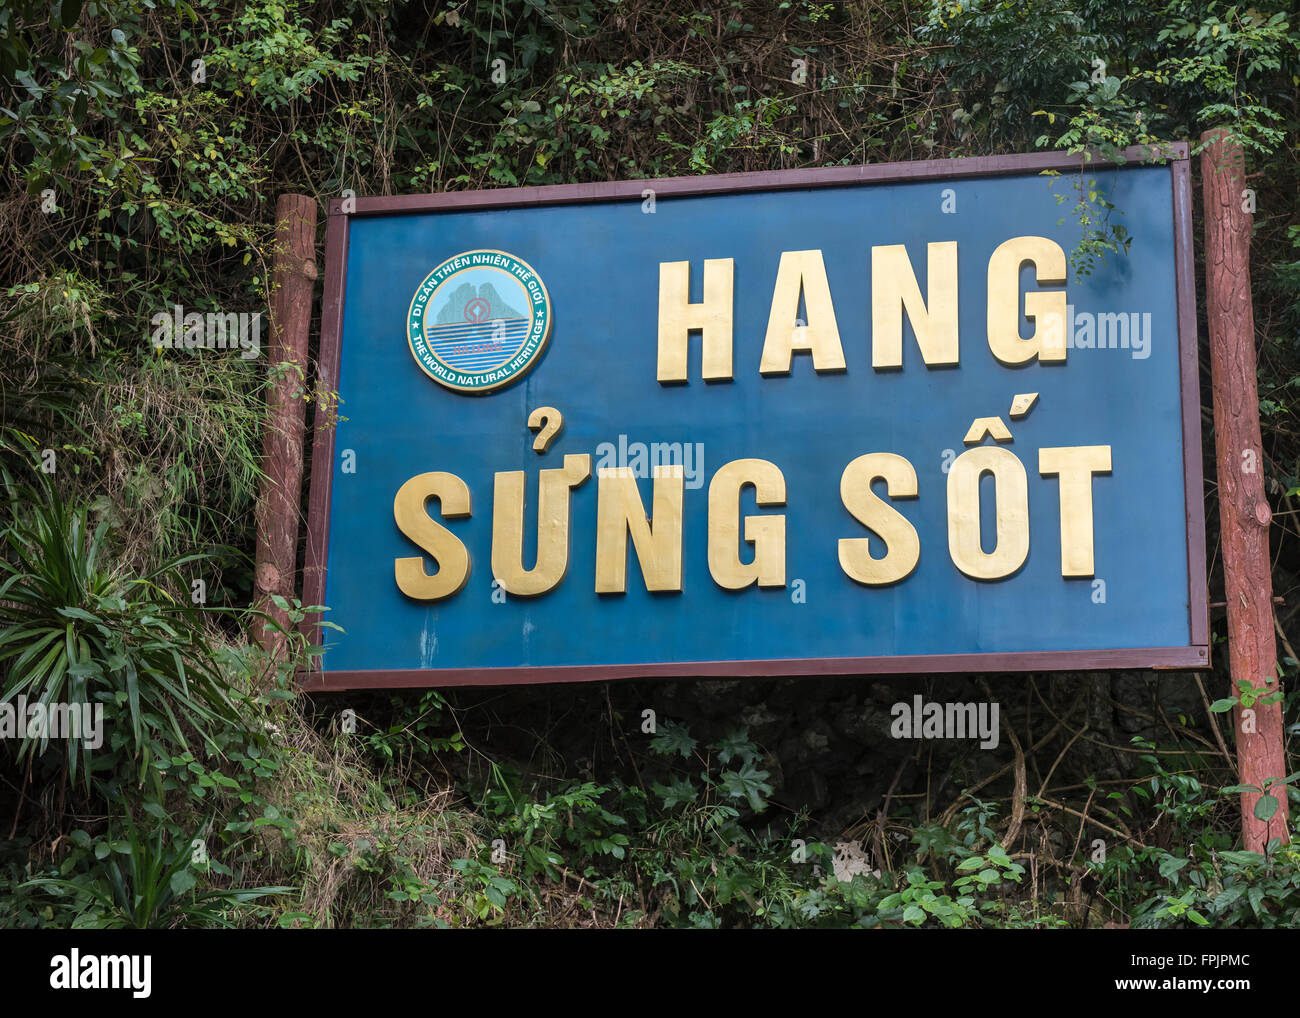 Sign for Hang Sung Sot cave on the cliff on an island in Halong Bay, Vietnam surrounded by tropical vegetation. Stock Photo